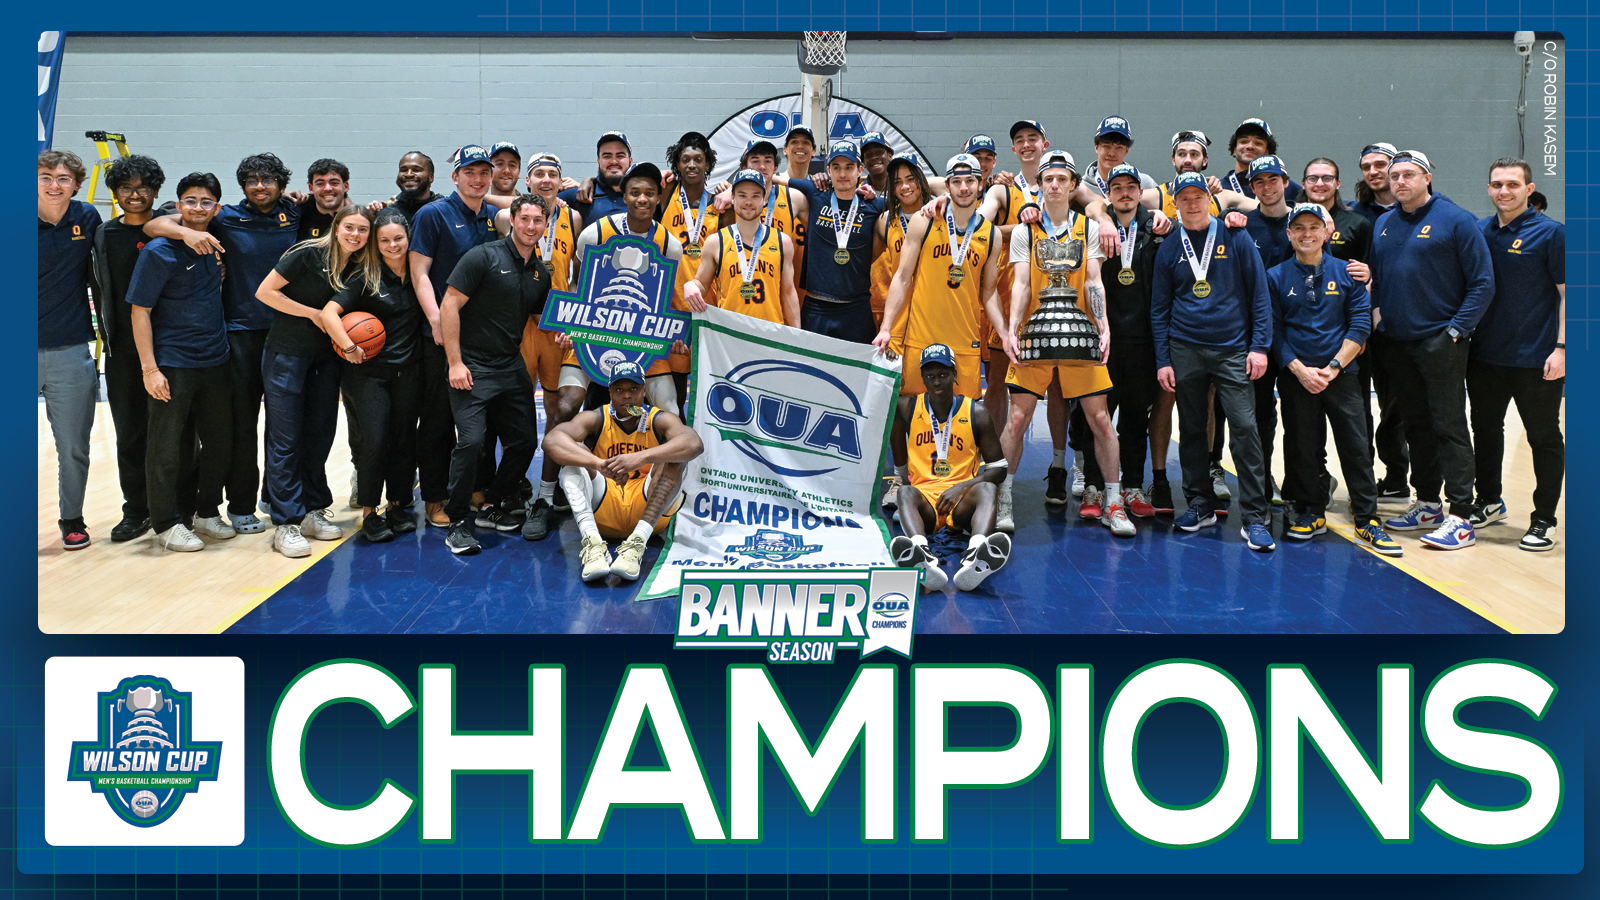 Graphic on blue background featuring the banner photo of the Queen's men's basketball team, placed above large white text that reads, 'CHAMPIONS' and the Wilson Cup logo on a white square in the bottom left corner